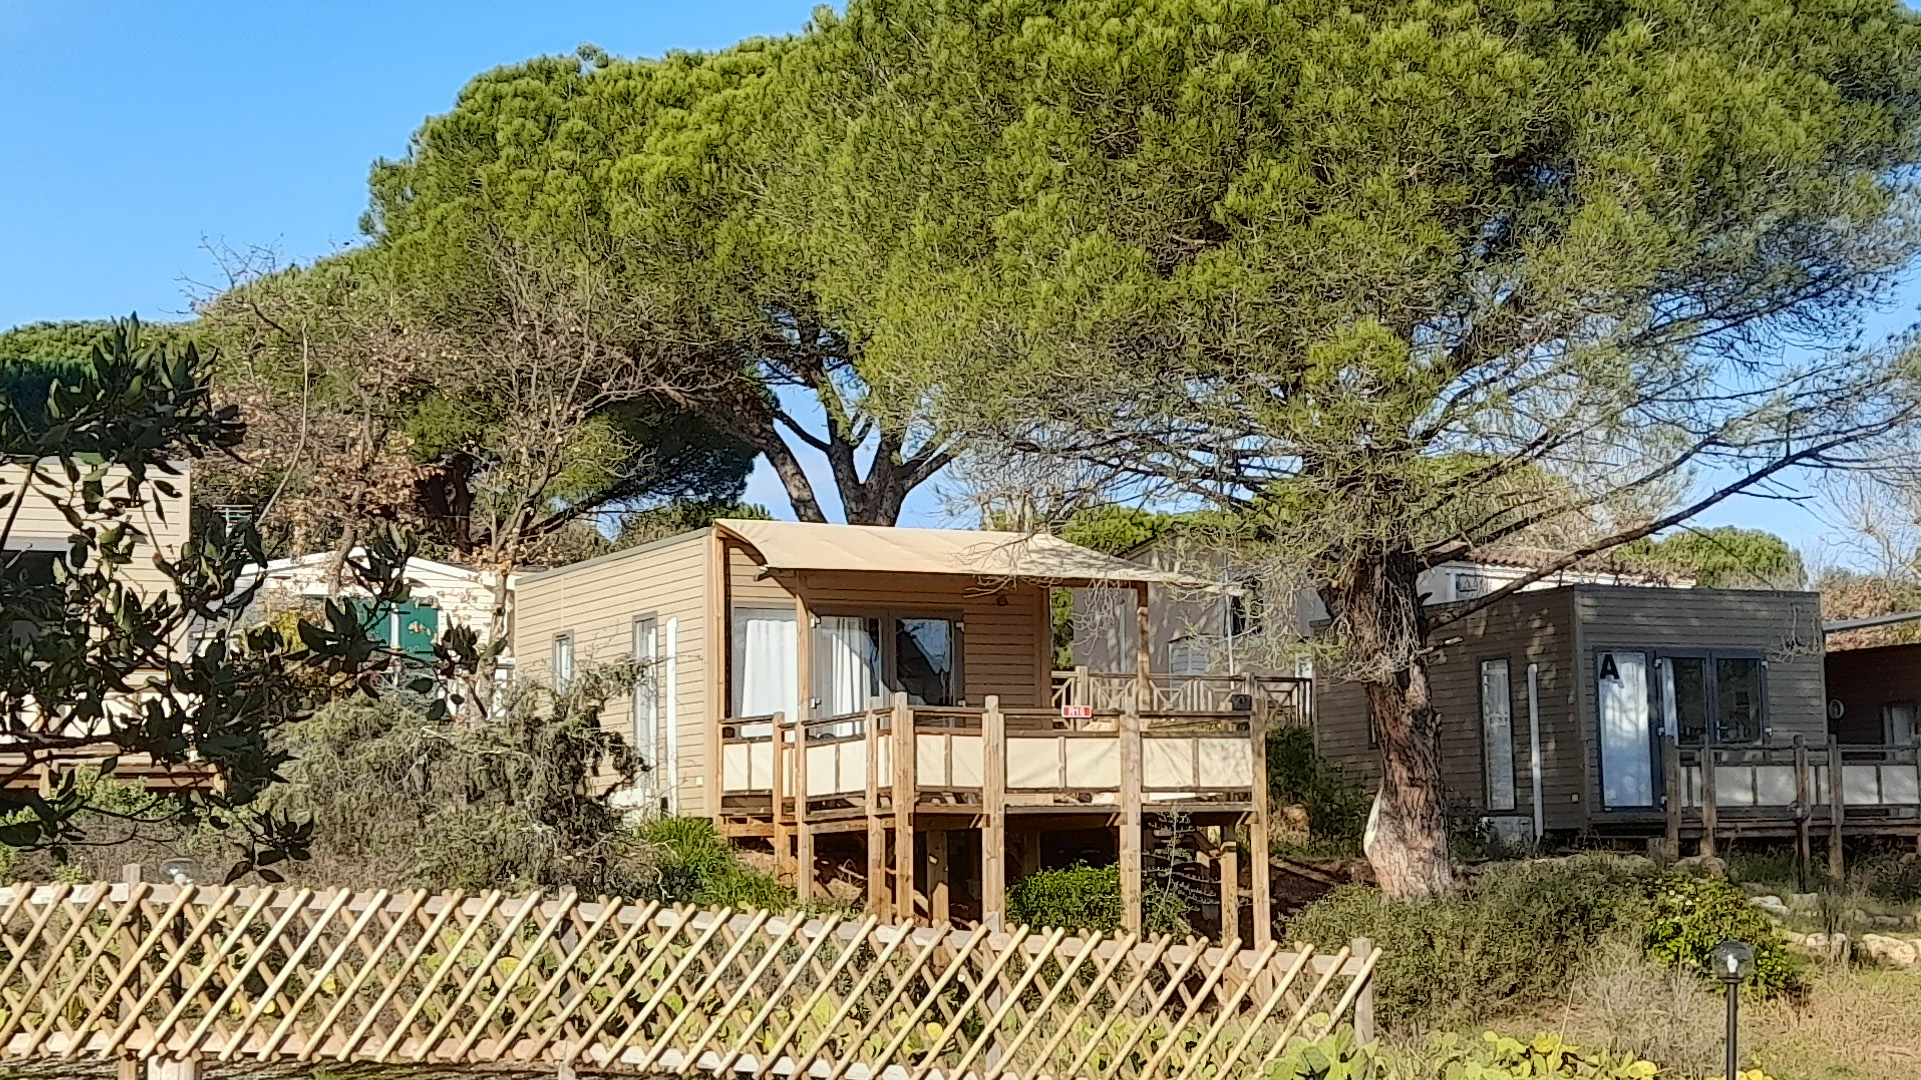 Location - Tennessy Confort - Camping Les Cigales, Le Muy